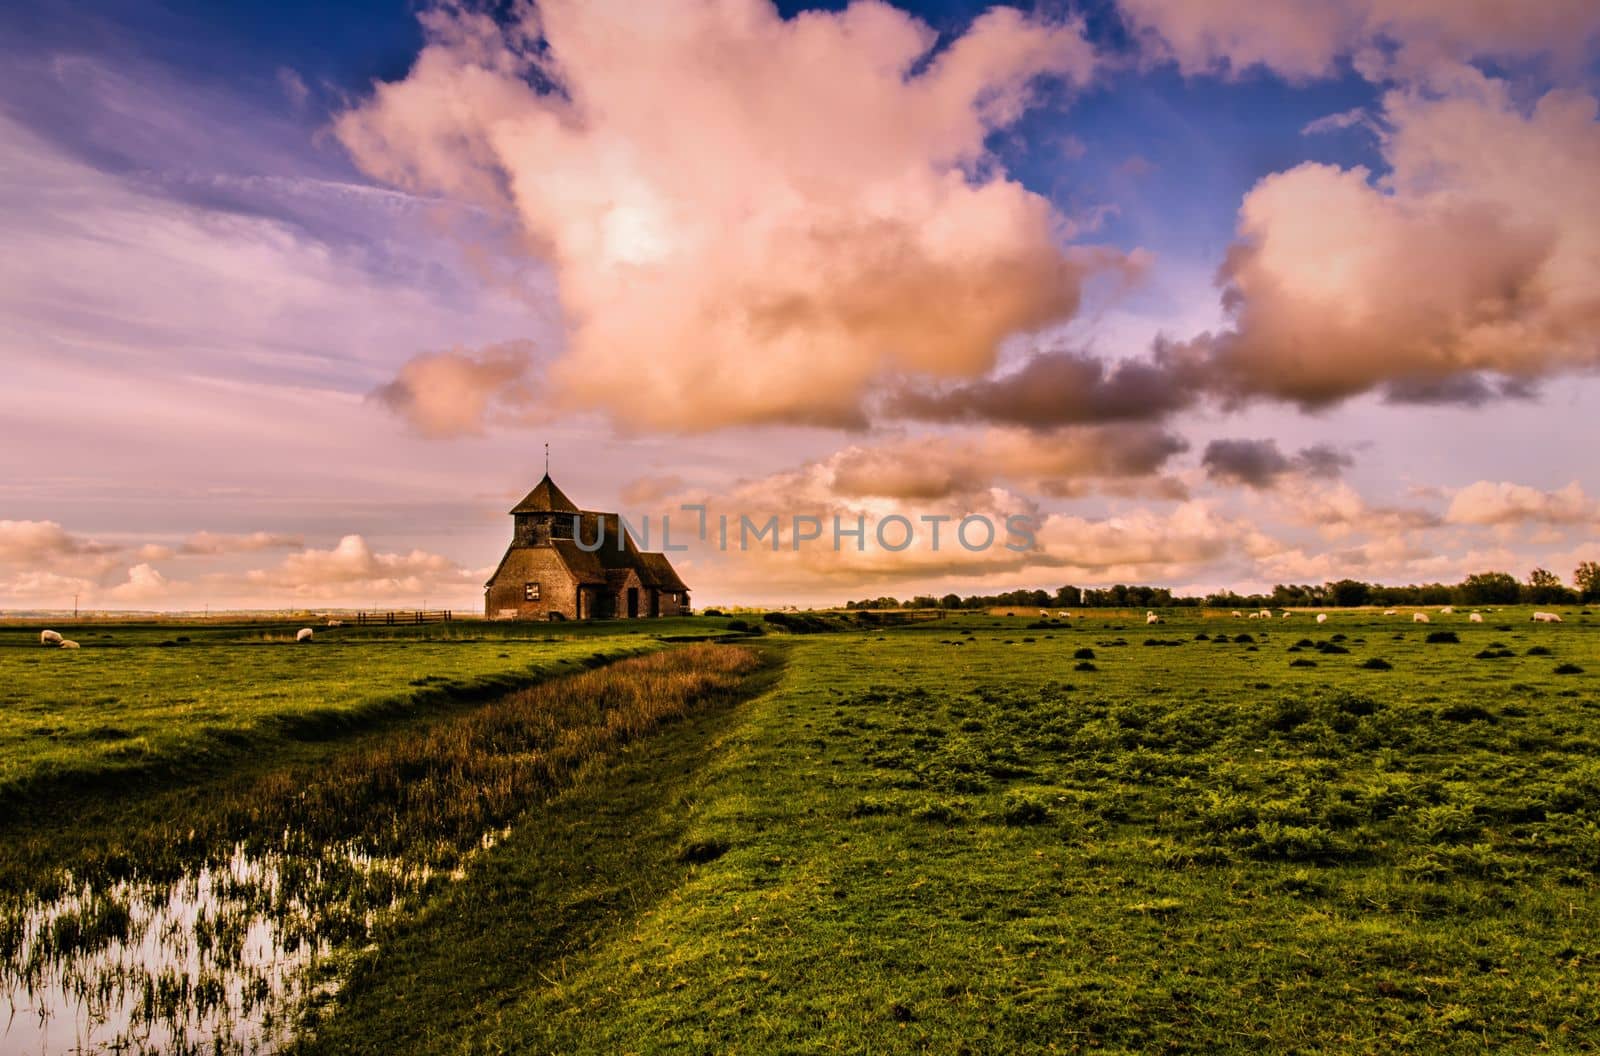 The church of St Thomas a Becket, Fairfield, is a rare example of a small medieval church which has managed to survive without an immediate village to sustain it. It stands remote and isolated on a man-made hillock above the Wallend Marsh, part of Romney Marsh, Kent, UK.

photograph © Jeremy Sage